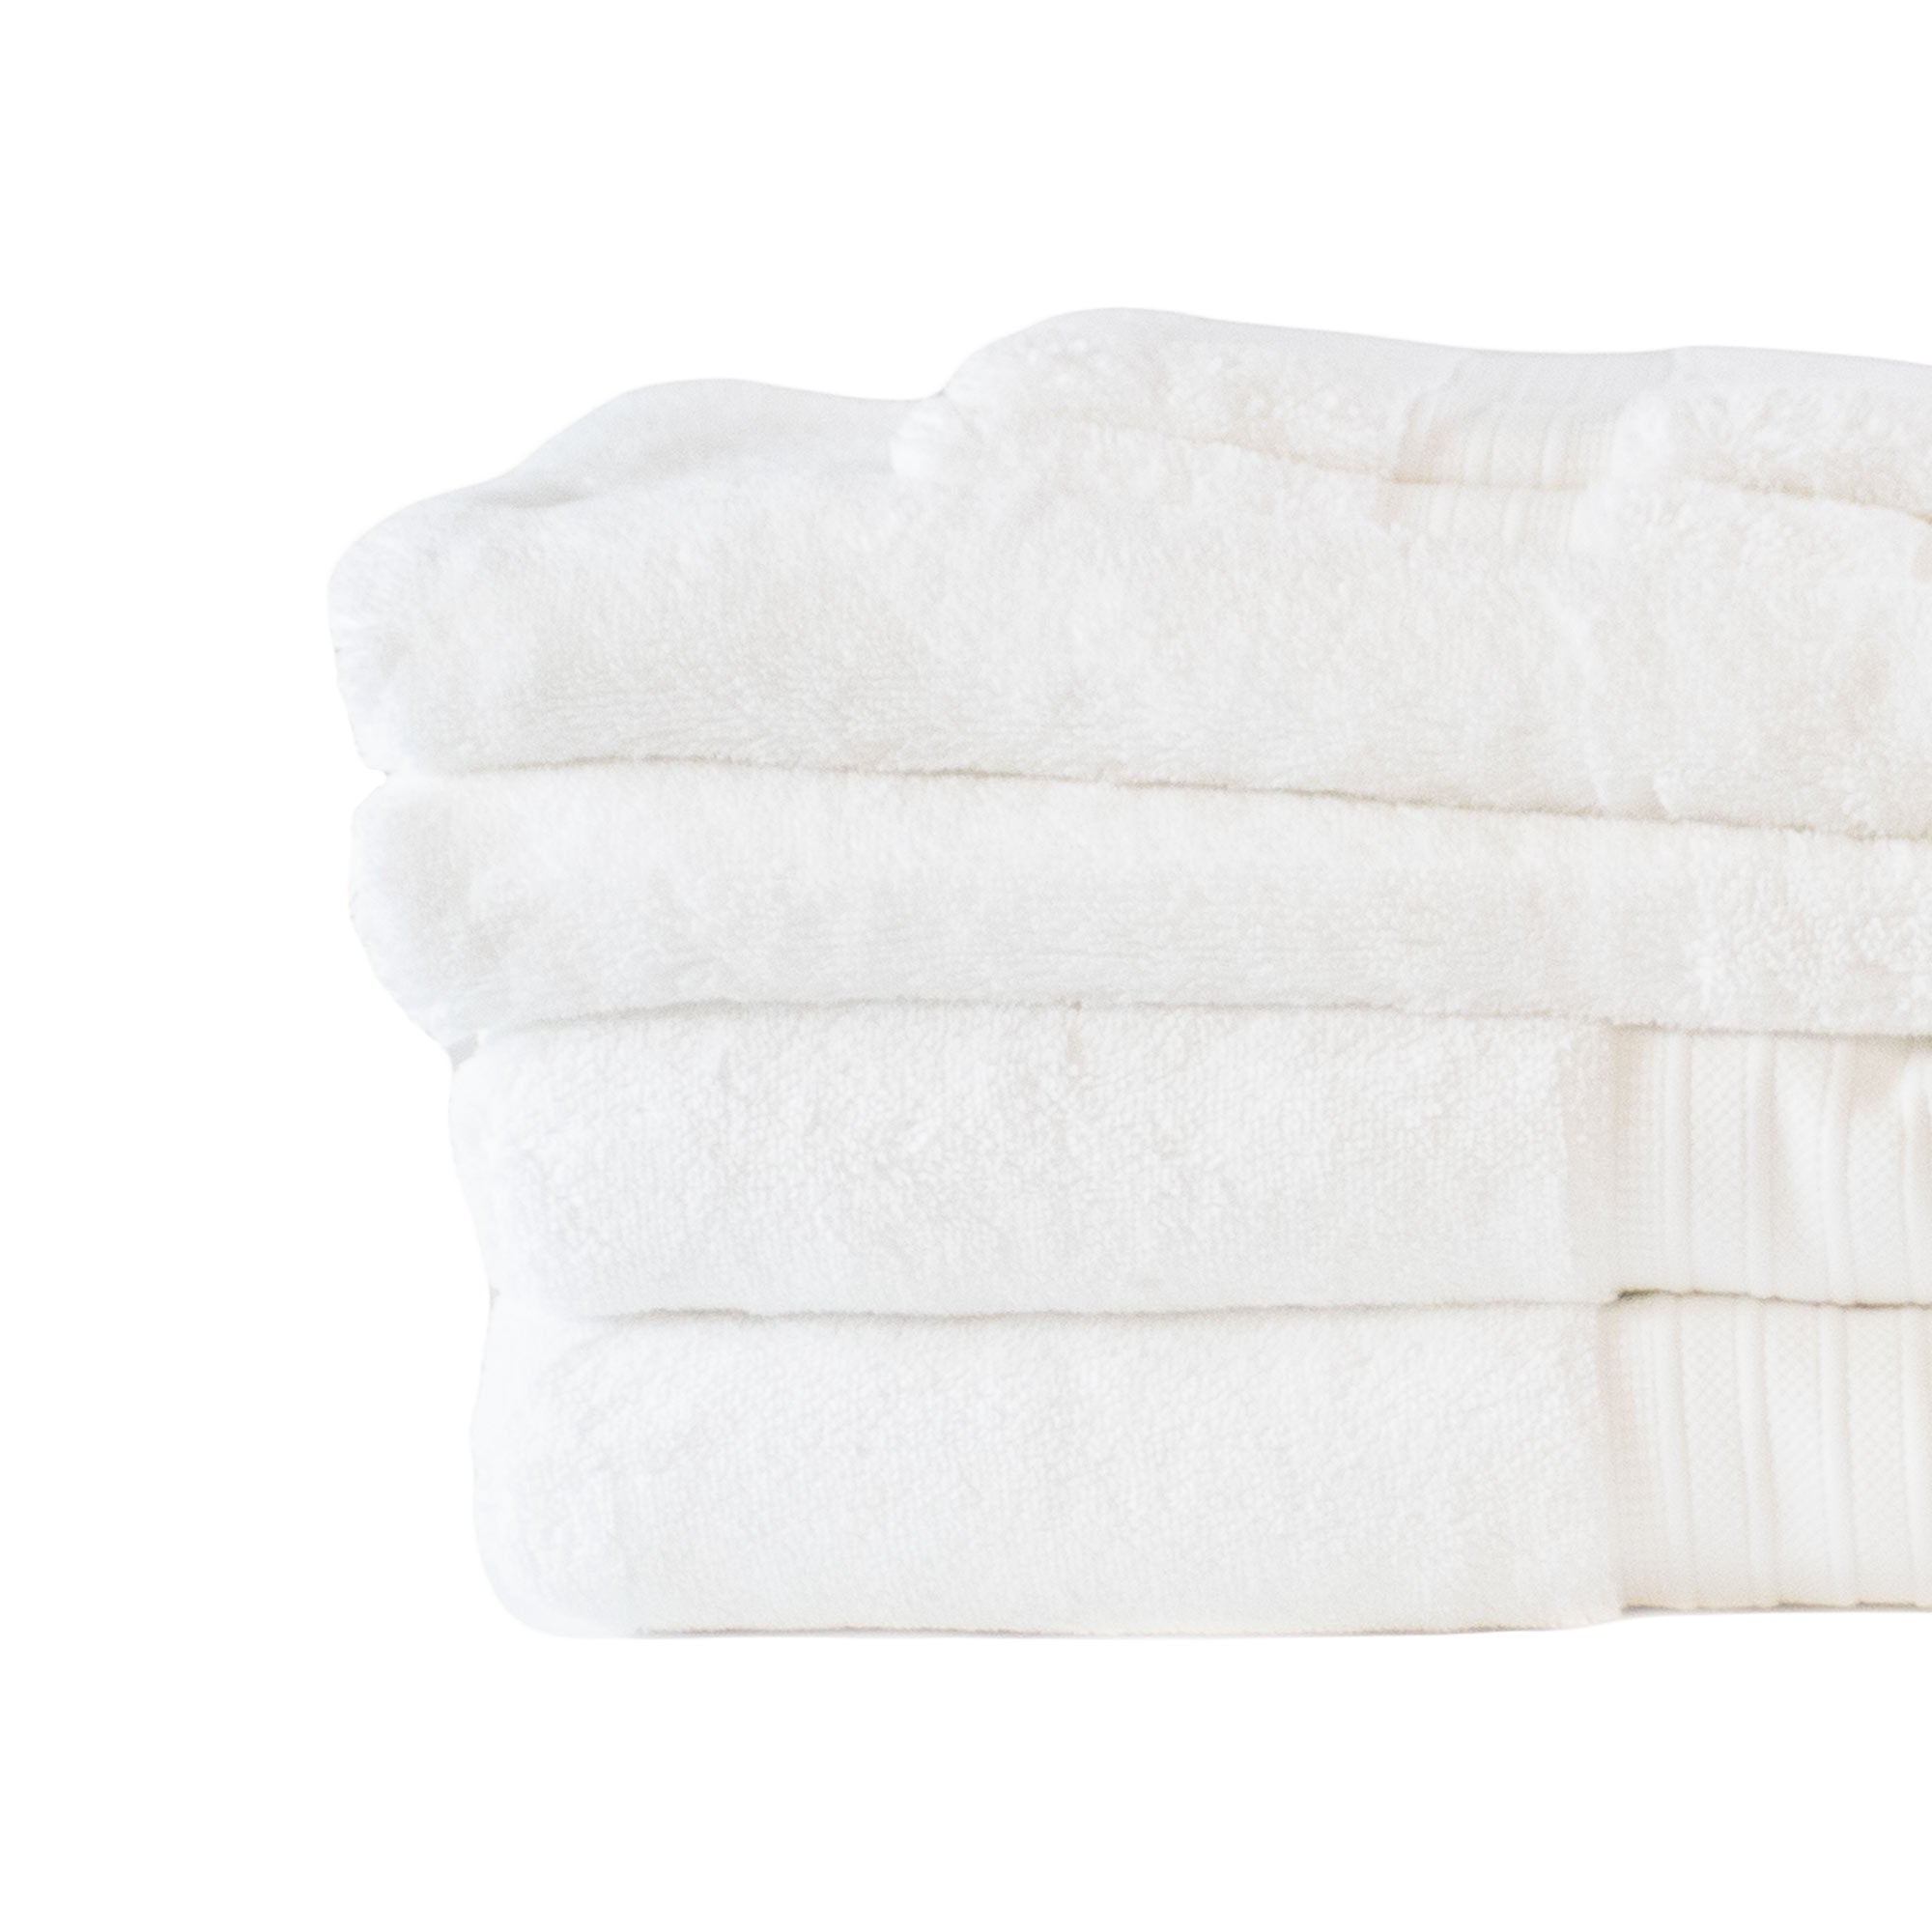 900 GSM Egyptian Cotton Towel Set of 3, Soft & Absorbent Face, Hand, Bath  Towels